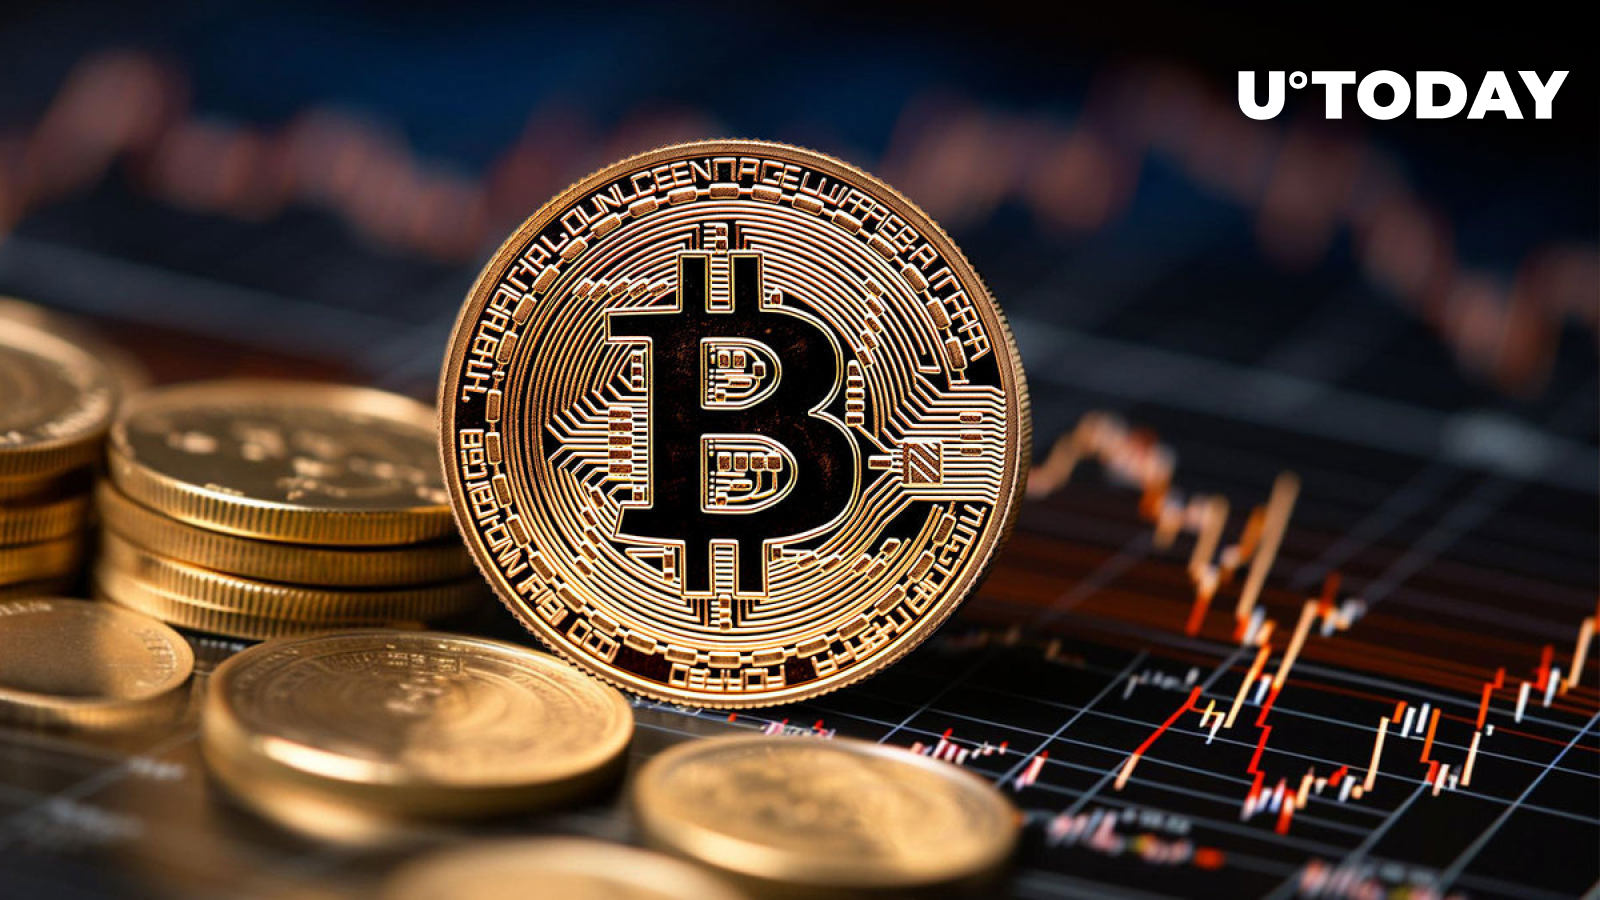 Don’t Panic, Bitcoin (BTC) Price Can’t Fall Below This Level: Analyst